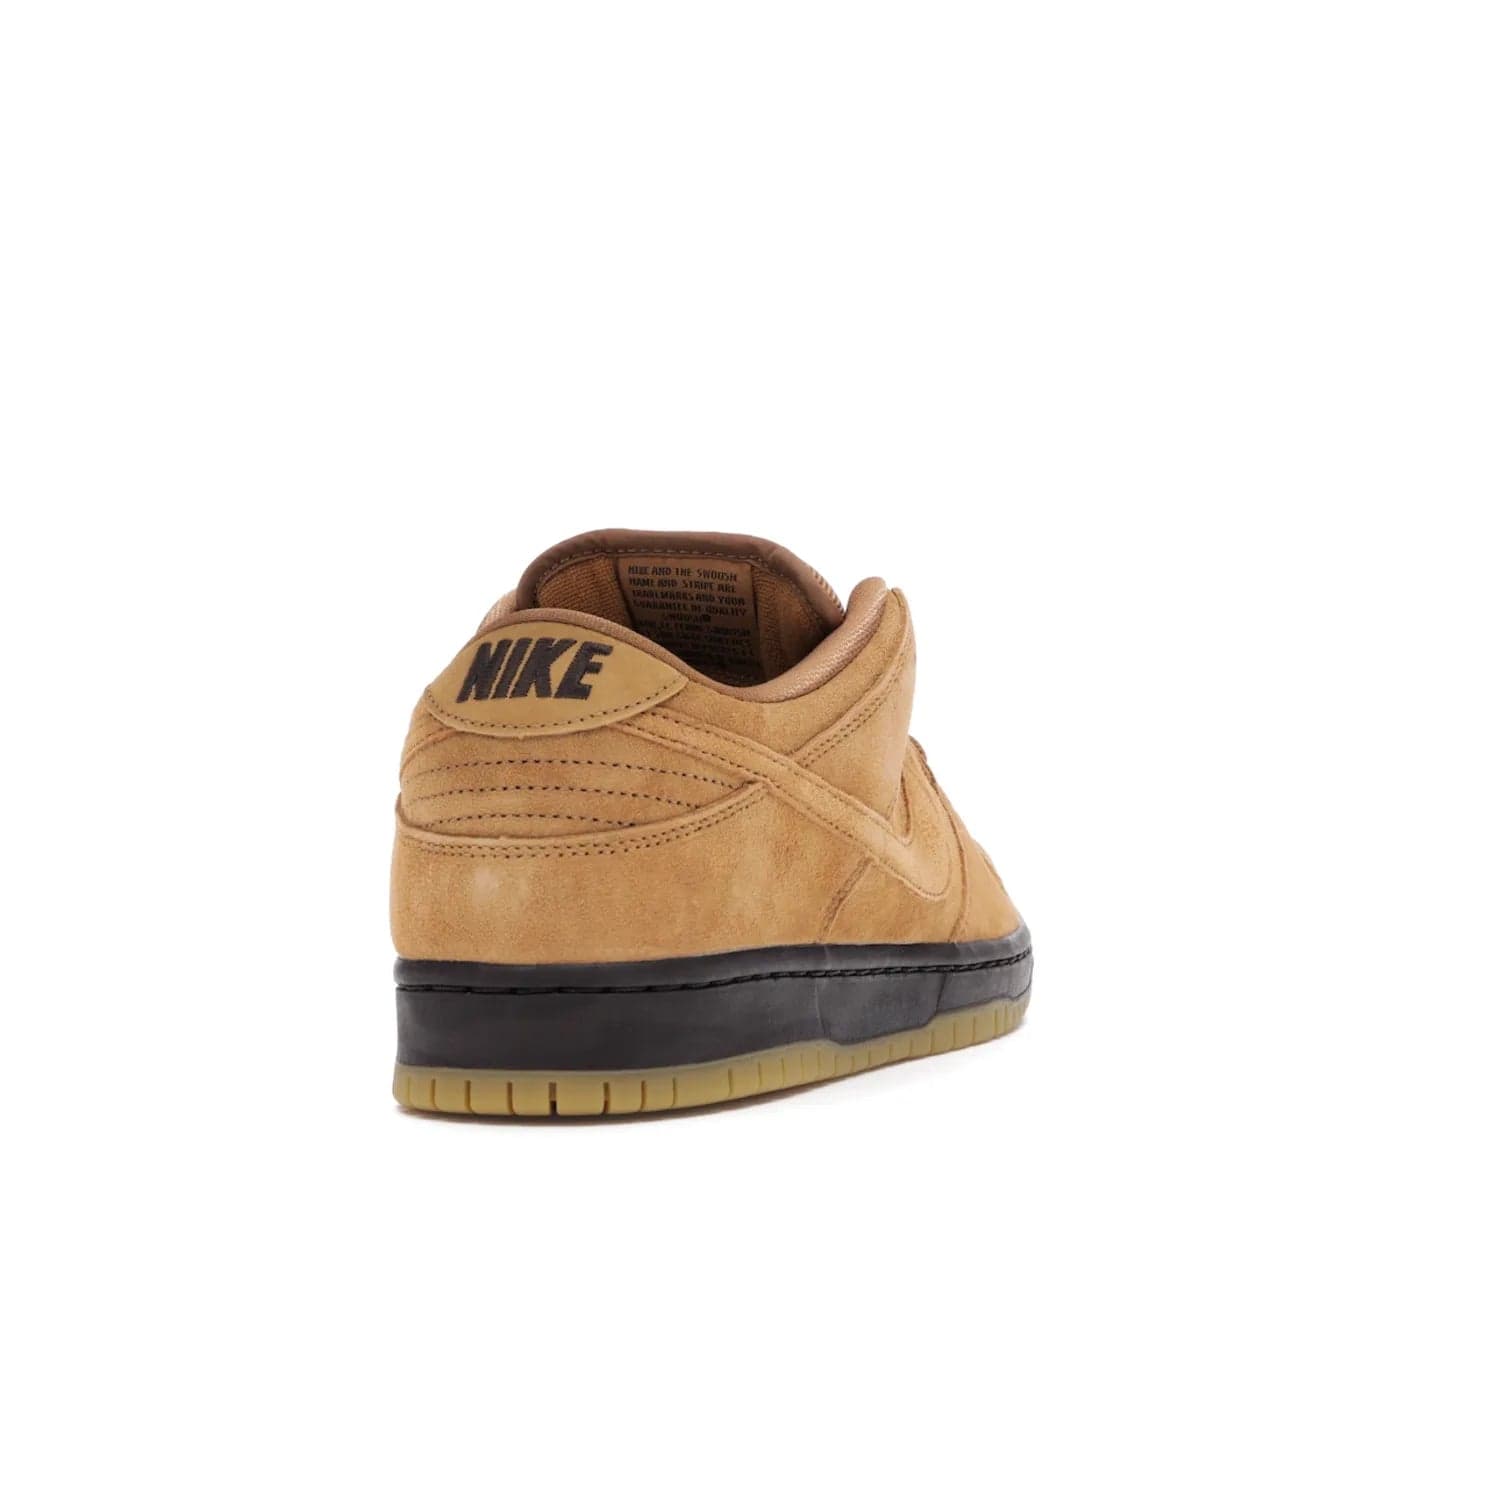 Nike SB Dunk Low Wheat (2021/2023) - Image 30 - Only at www.BallersClubKickz.com - The Nike SB Dunk Low Wheat (2021/2023)has a sleek silhouette and wheat suede upper. Tan tones for lining, mesh tongues, and laces. Iconic color palette midsole, perforated boxing toe. Brown branding on tongue and heel. Gum rubber outsole with partitioned pattern for traction. Eschewed in Feb 2021 for $110.